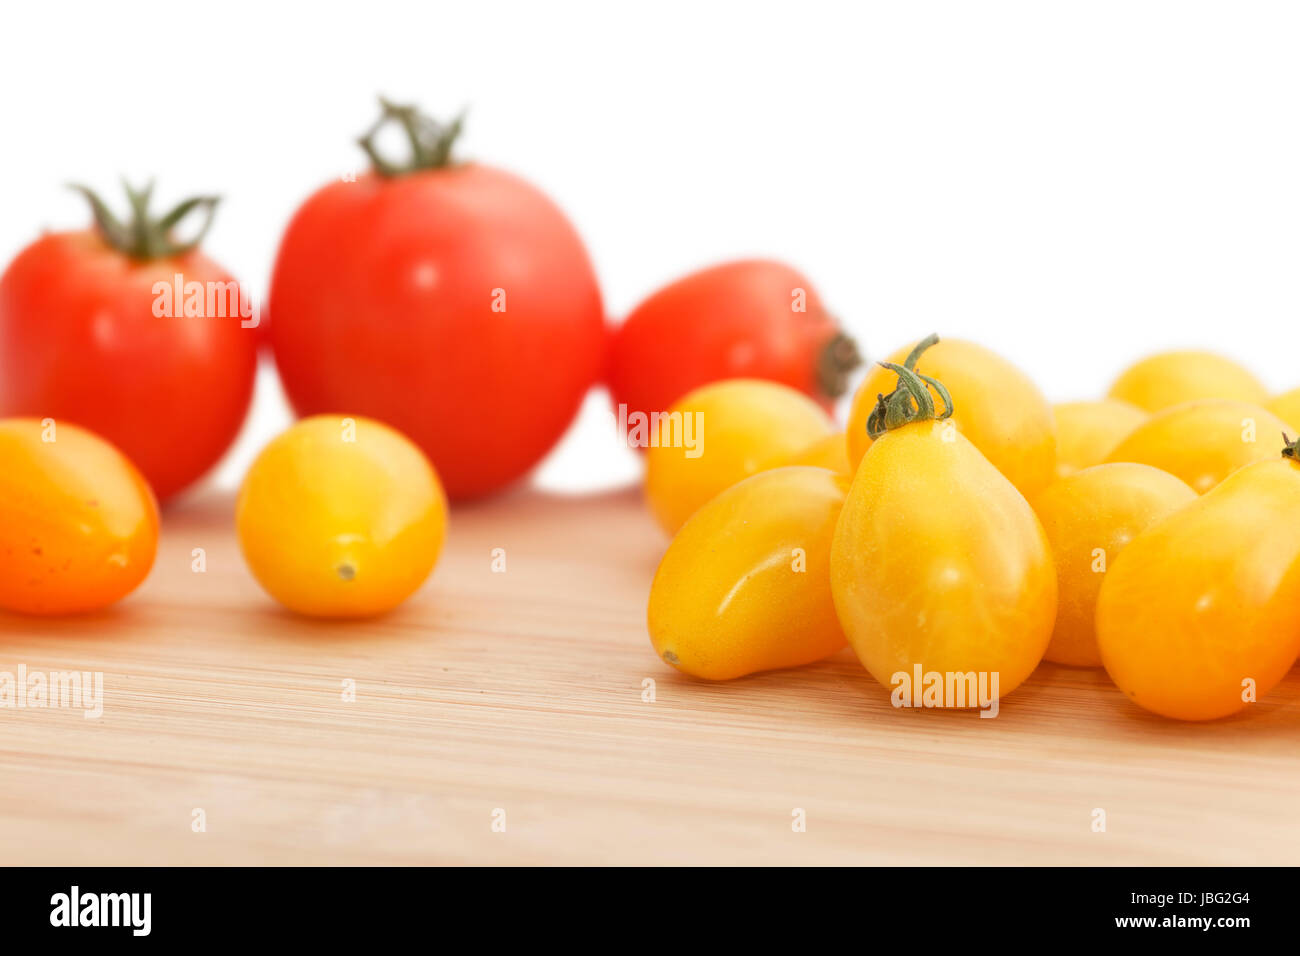 harvested tomatoes on wood. Stock Photo